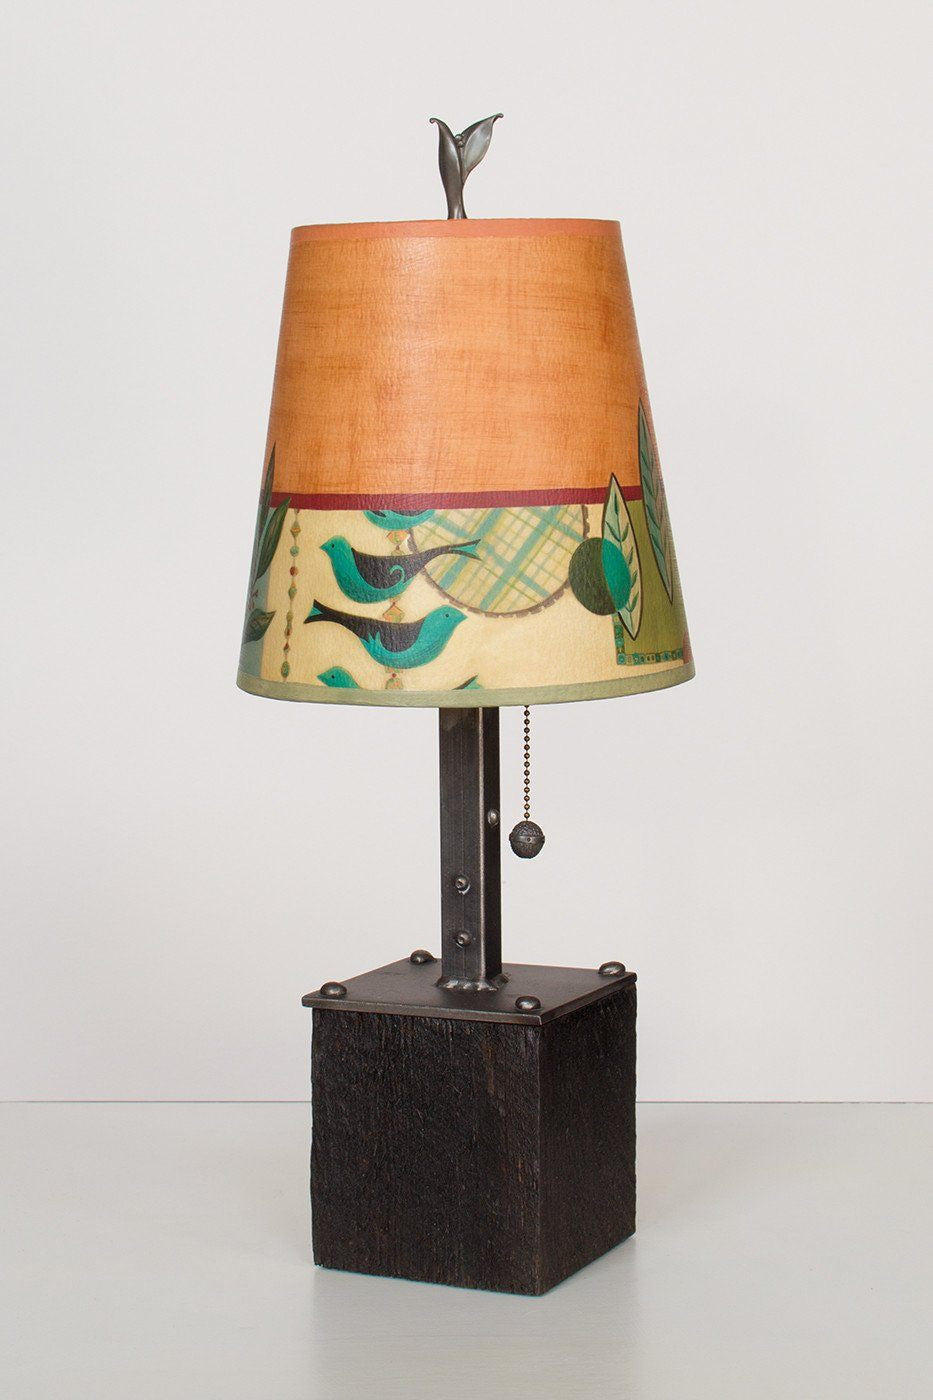 Janna Ugone & Co Table Lamps Steel Table Lamp on Reclaimed Wood with Small Drum Shade in New Capri Spice